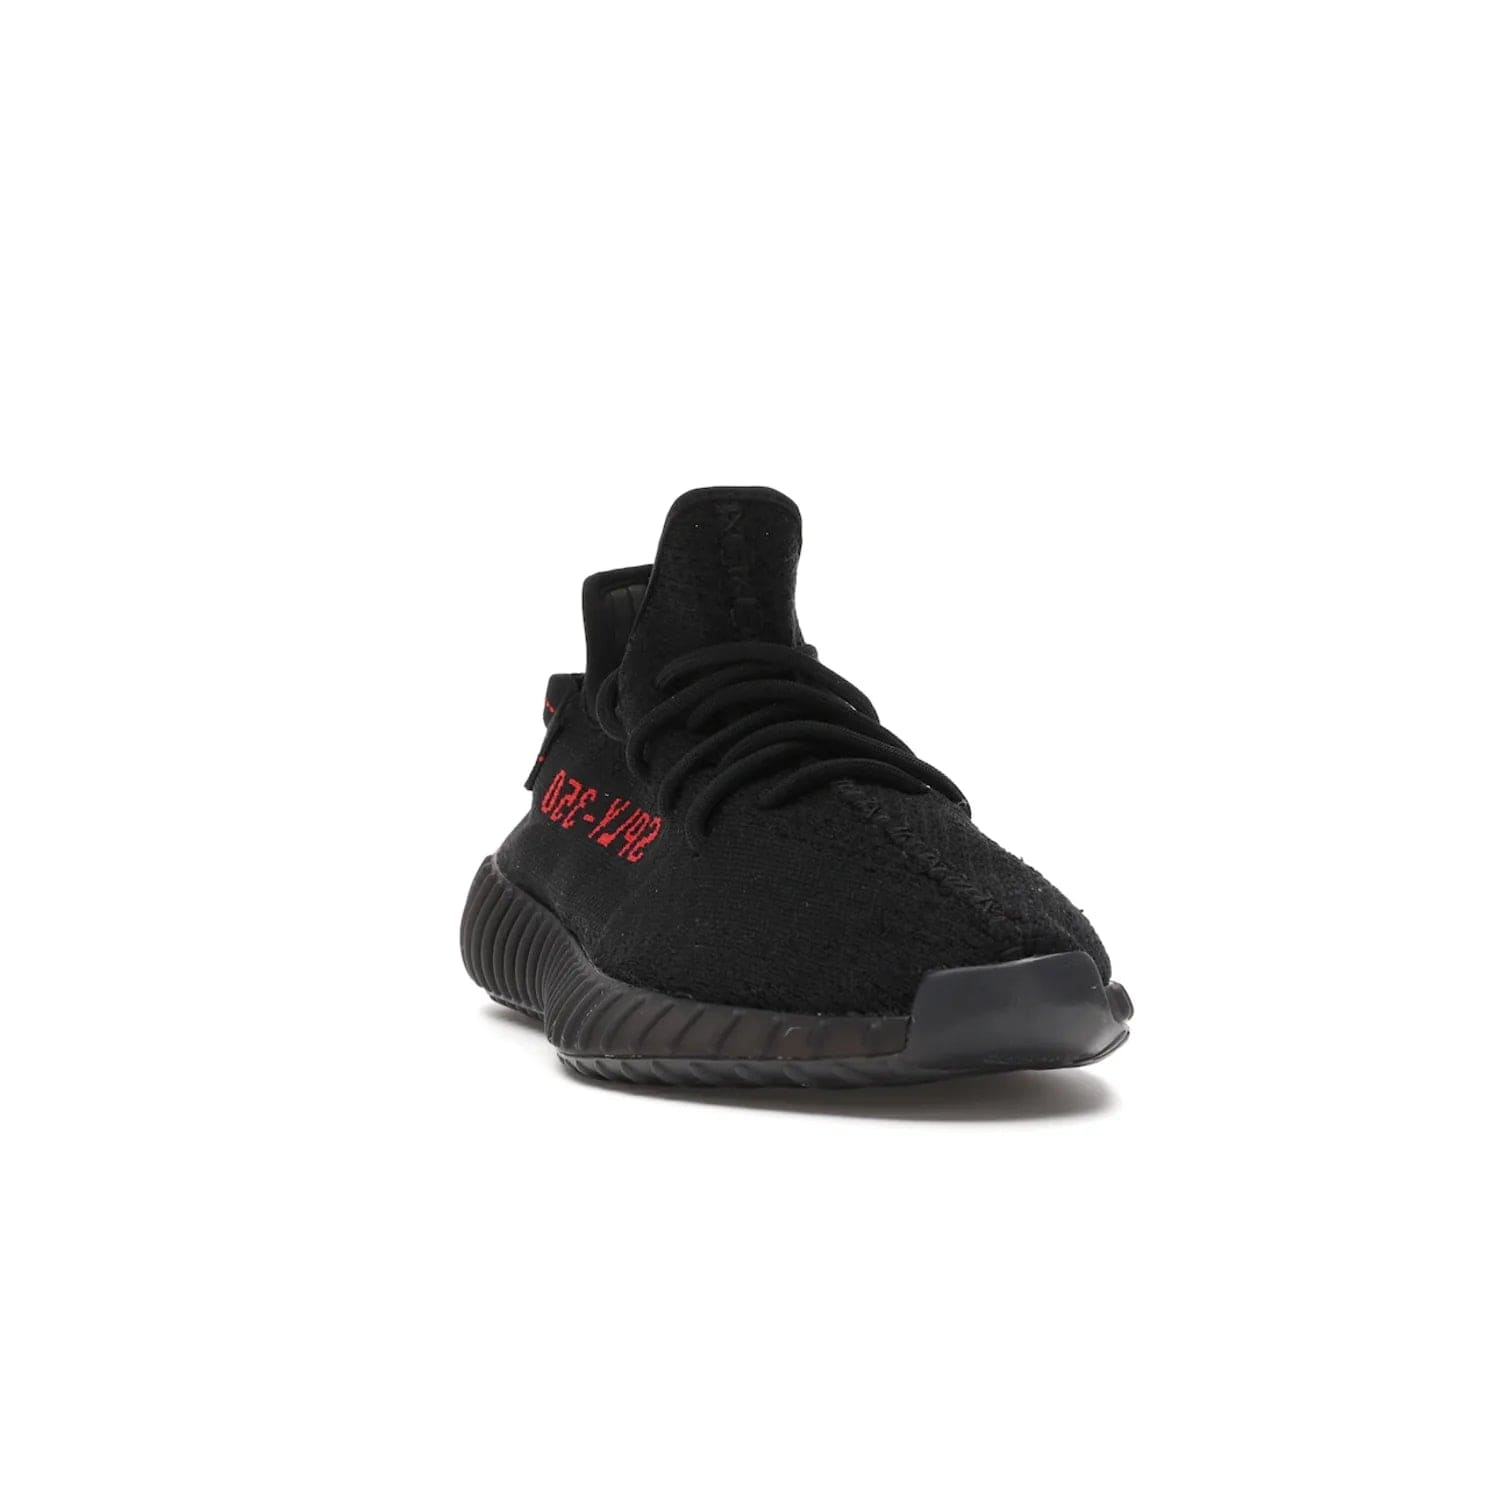 adidas Yeezy Boost 350 V2 Black Red (2017/2020) - Image 8 - Only at www.BallersClubKickz.com - Adidas Yeezy Boost 350 V2 Black Red: a classic colorway featuring black Primeknit upper, BOOST cushioning system, and iconic "SPLY-350" text. Released in 2017 for a retail price of $220.